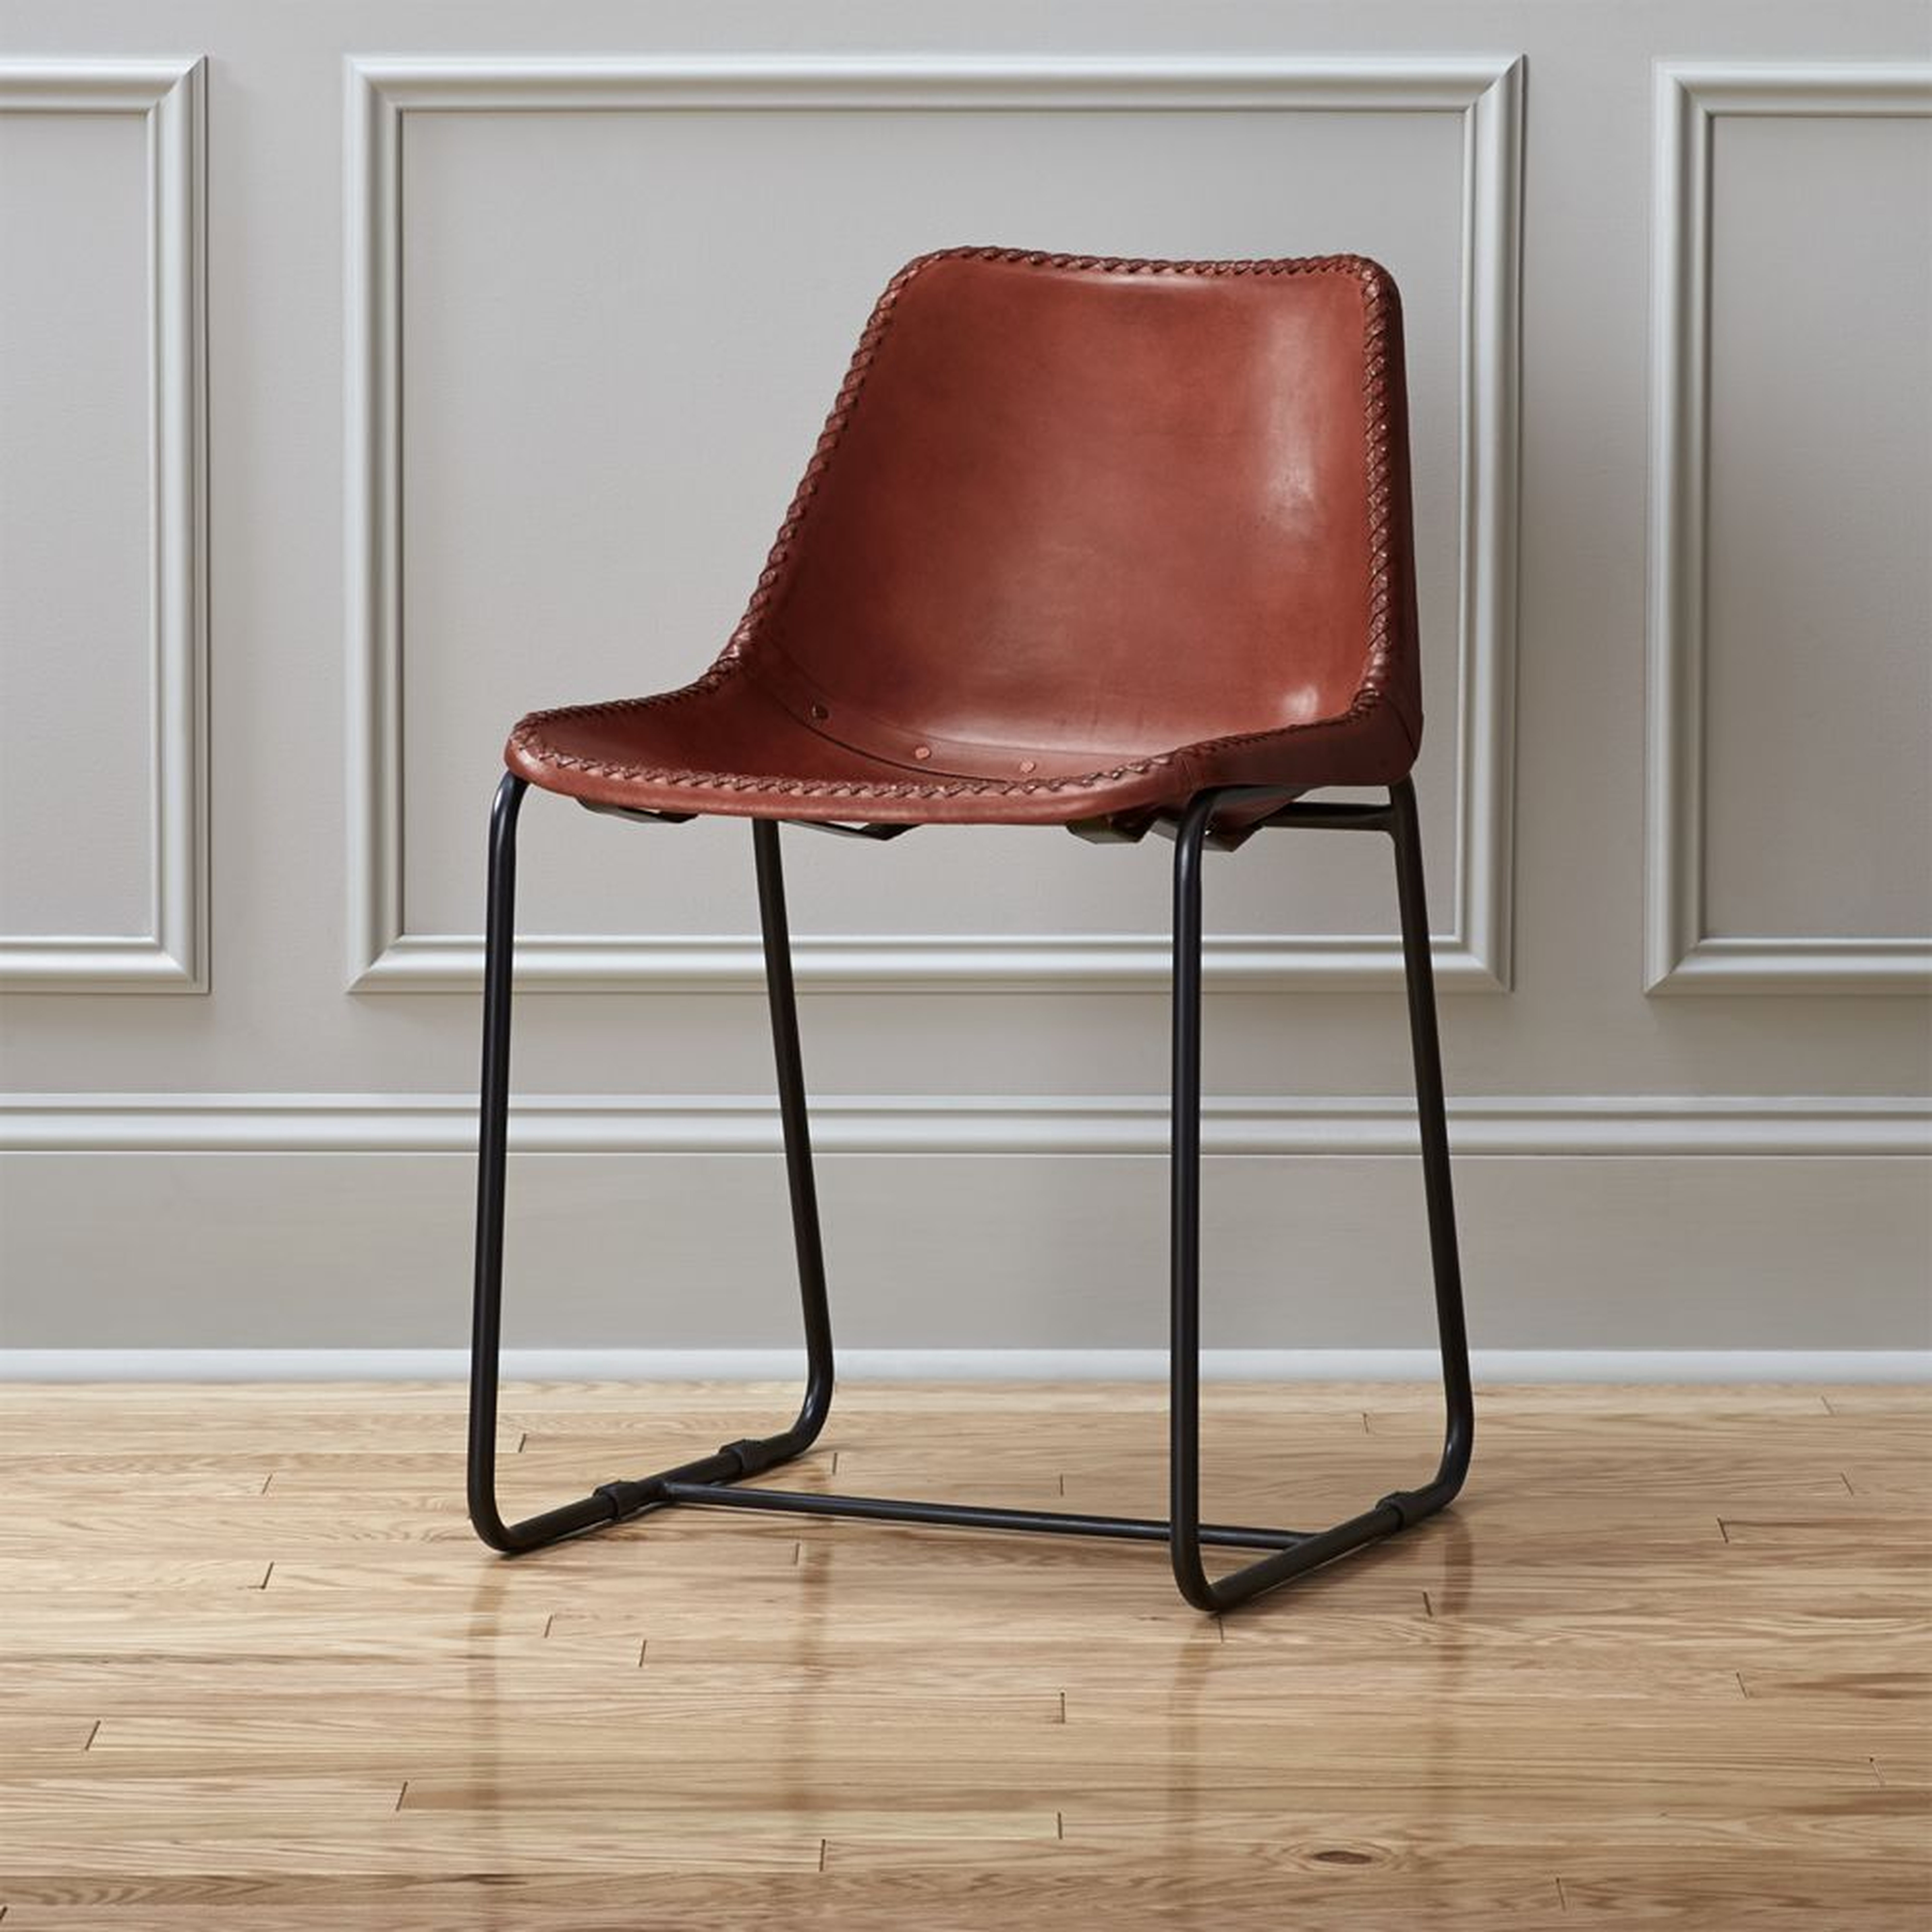 Roadhouse Leather Chair - CB2